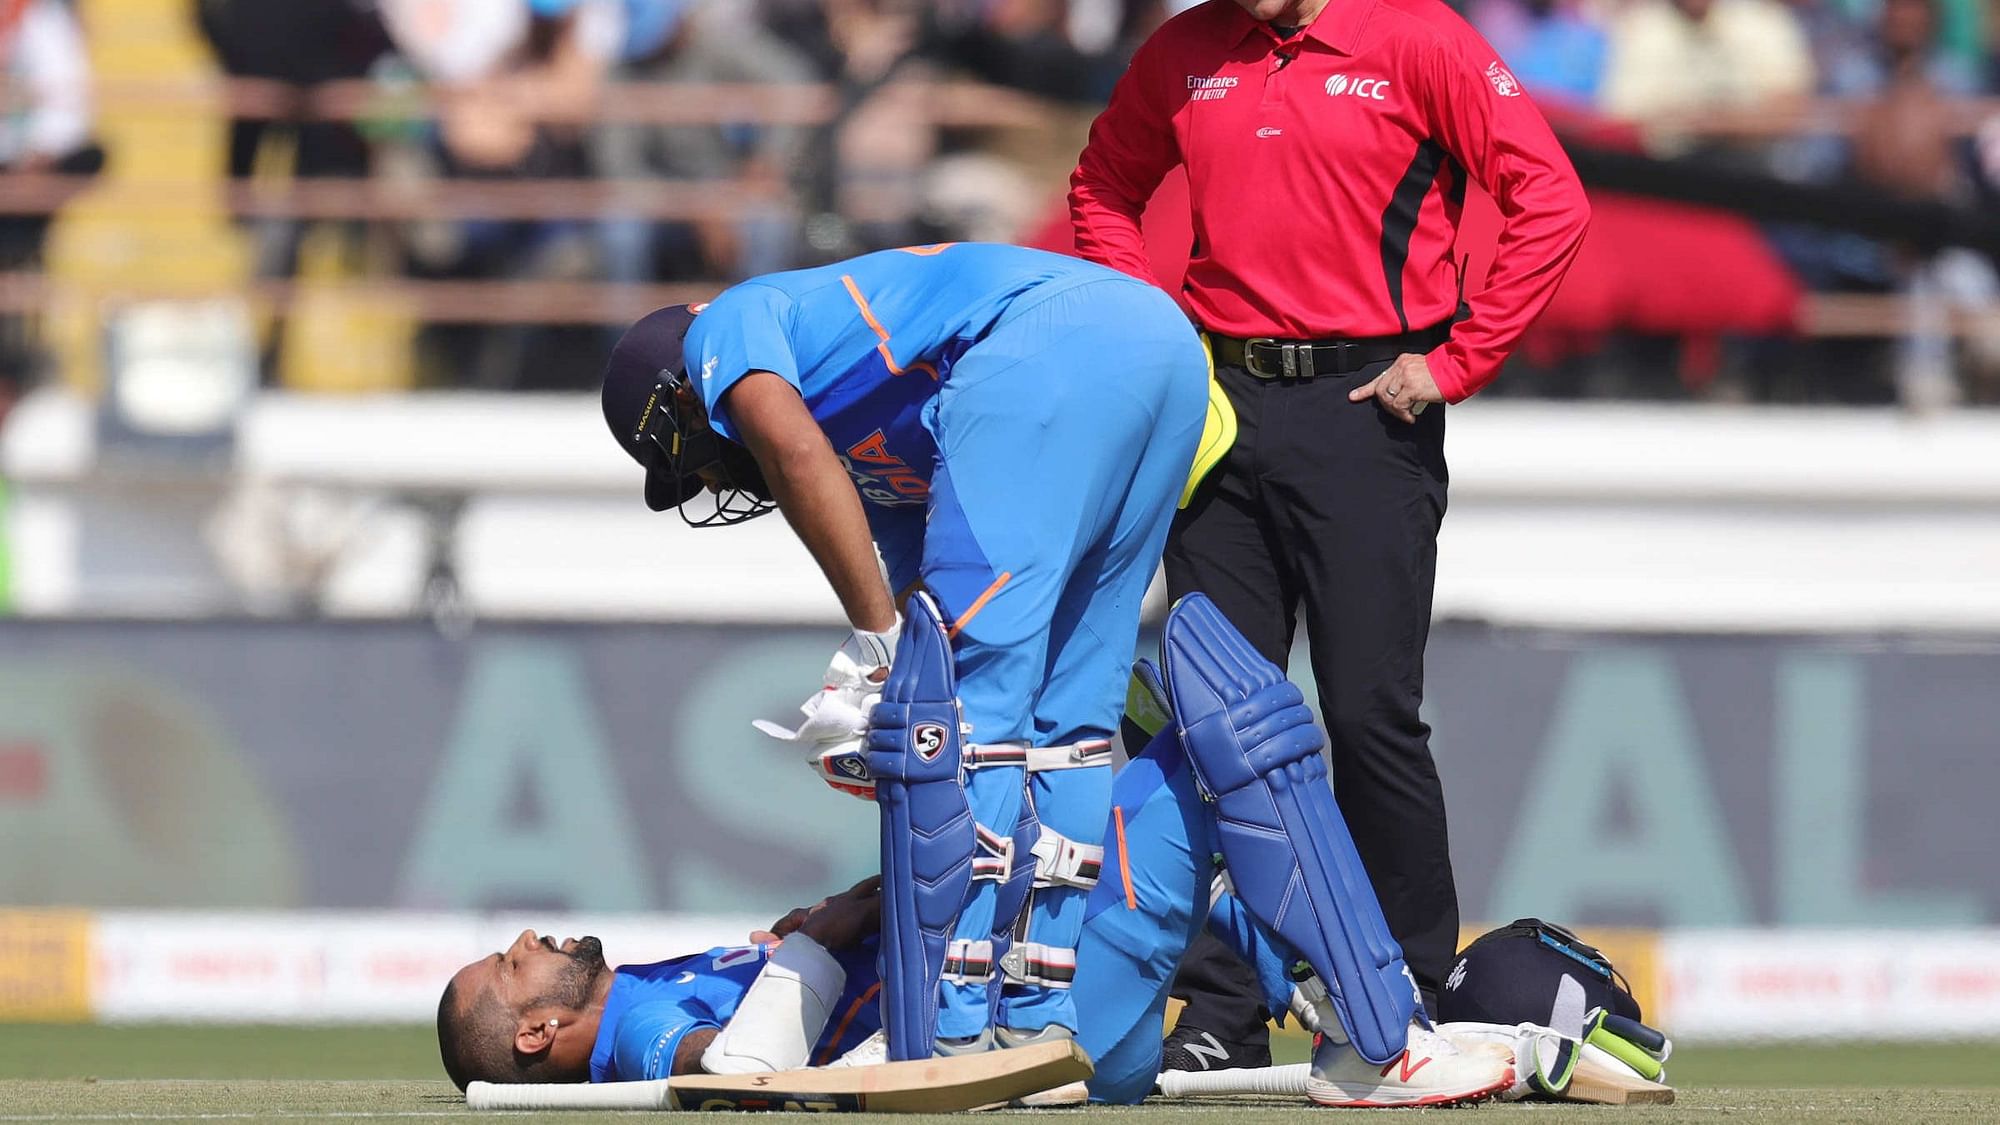 Shikhar Dhawan was hit on the rib cage in the 10th over of the Indian innings in the second ODI in Rajkot on Friday.